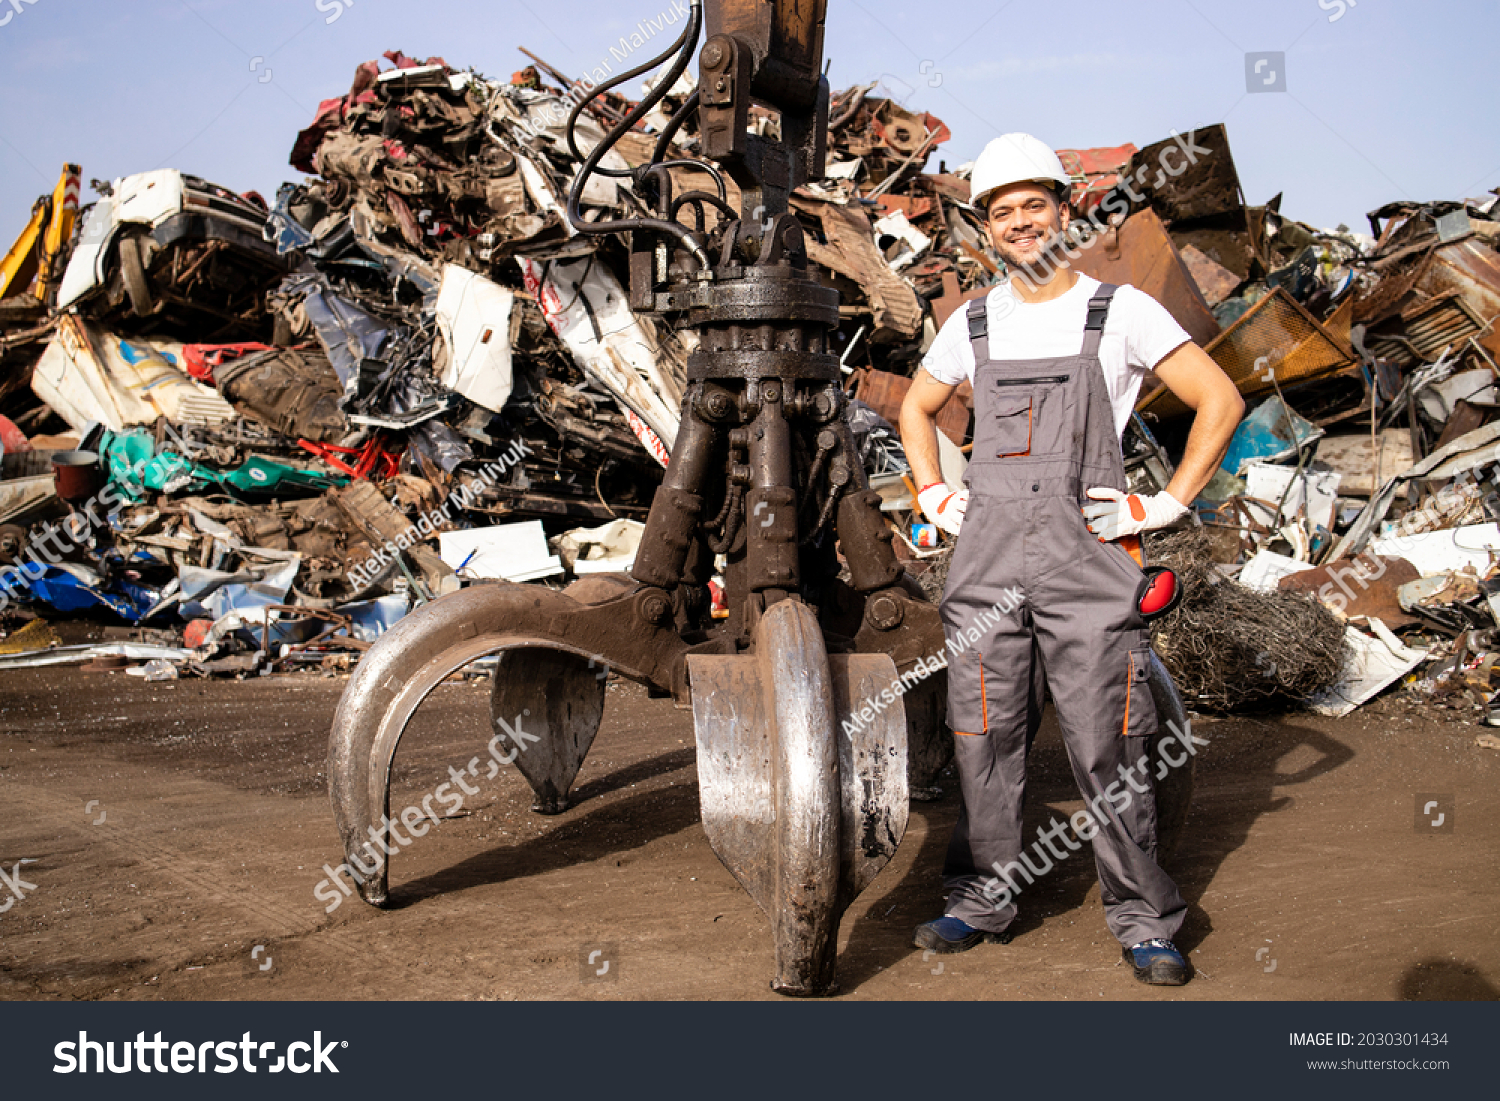 Portrait of worker standing by hydraulic industrial machine with claw attachment used for lifting scrap metal parts in junk yard. #2030301434